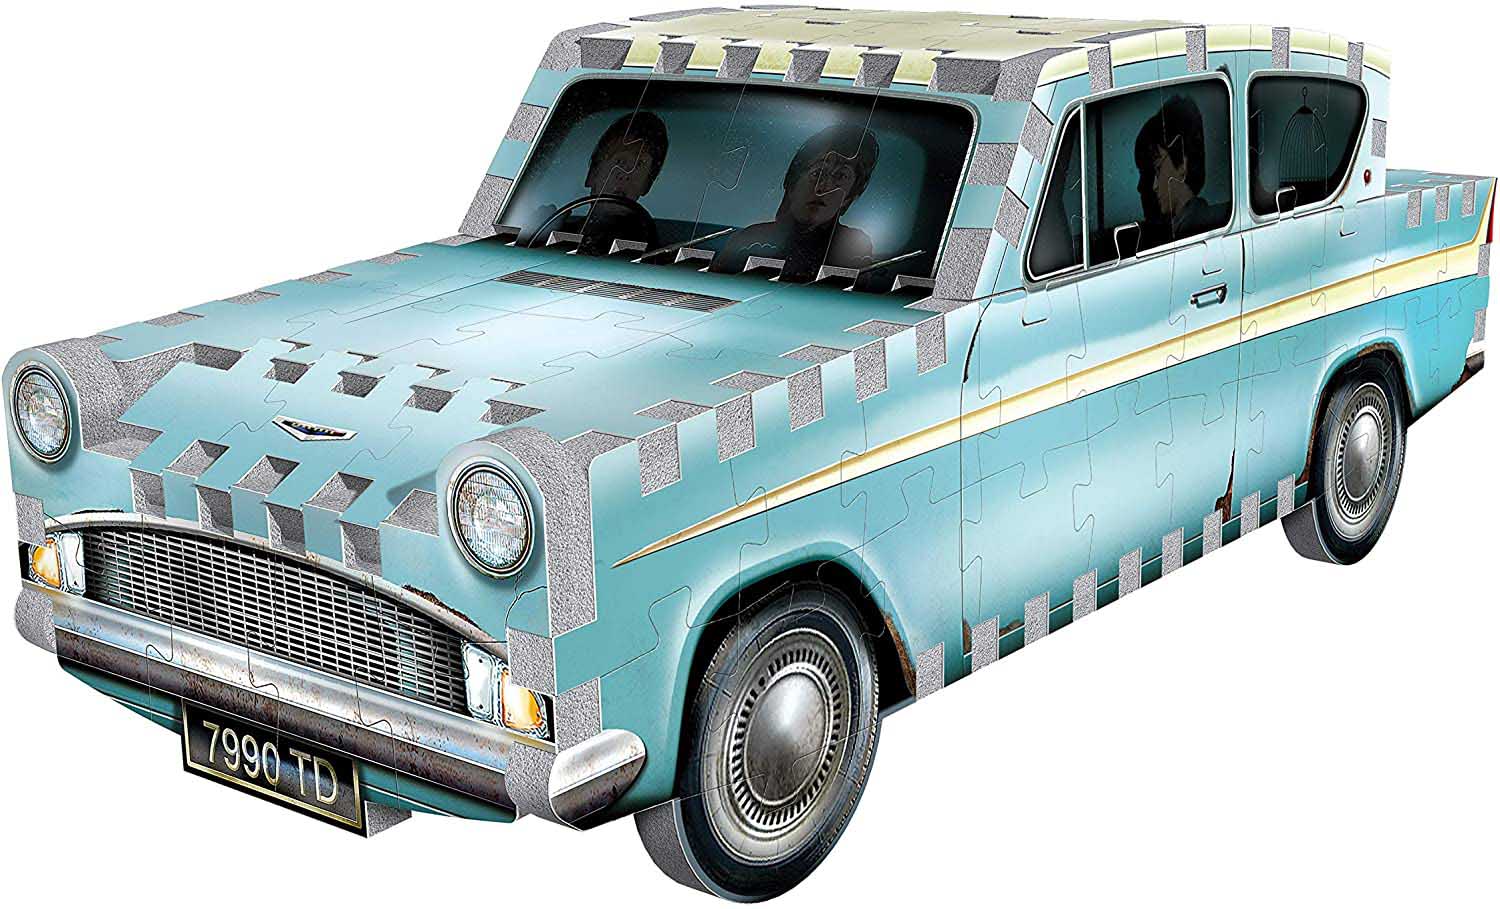 Flying Ford Anglia Car Jigsaw Puzzle